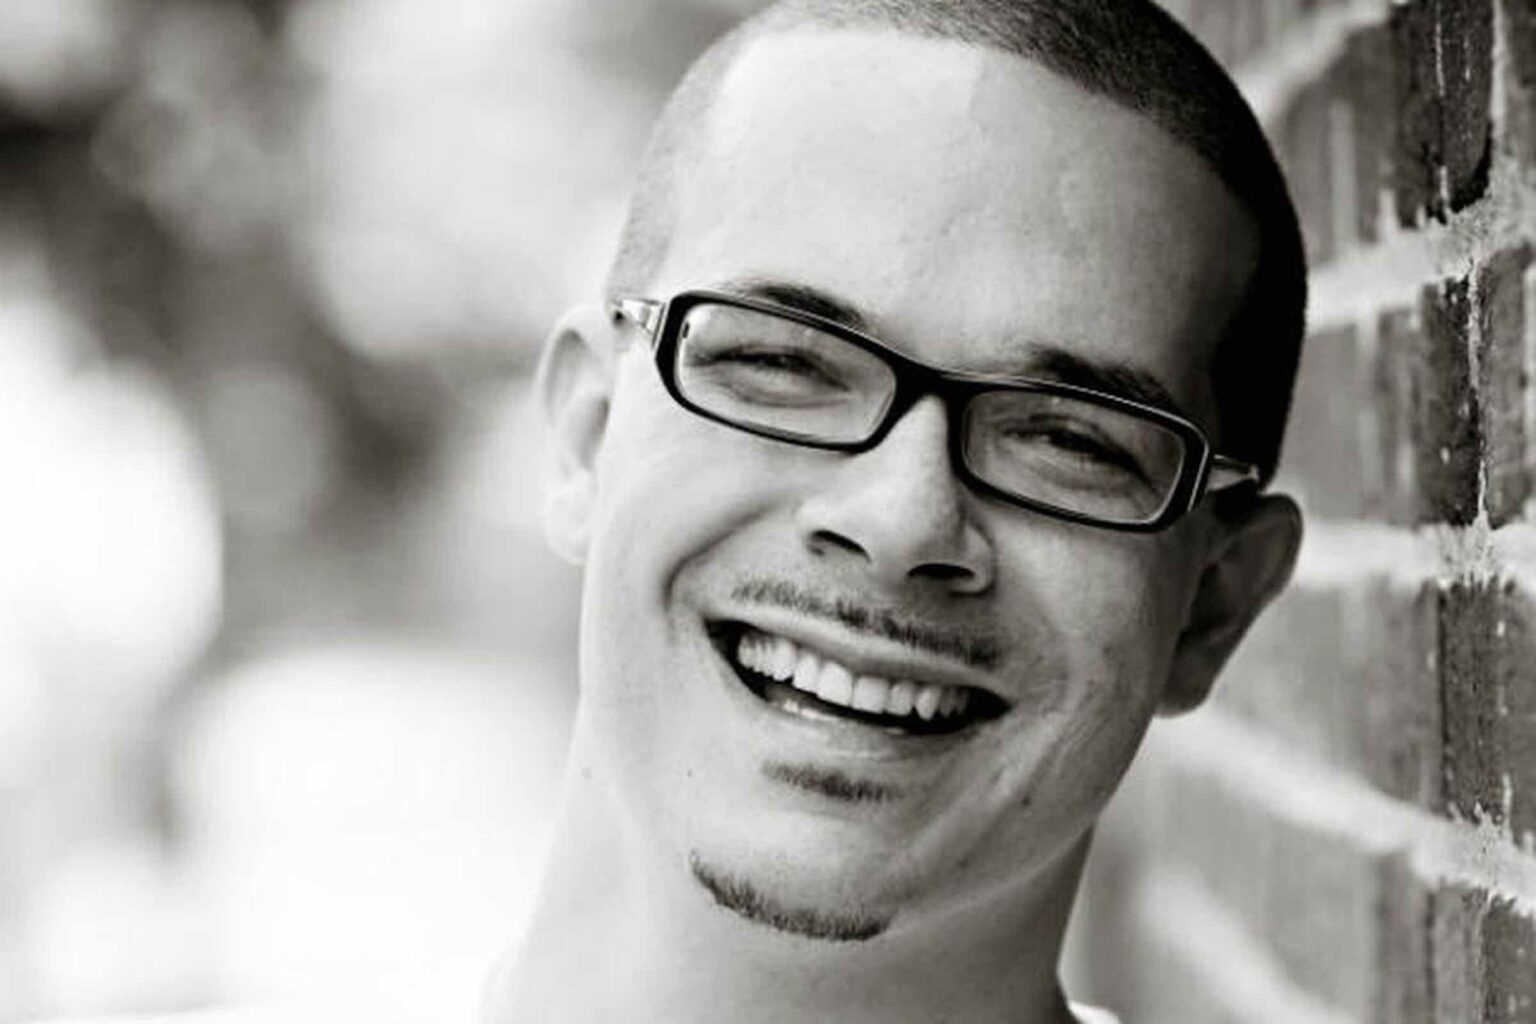 It seems like Twitter’s favorite punching bag has come back for another round. Grab your teacups and dive into the latest hit to Shaun King's net worth.